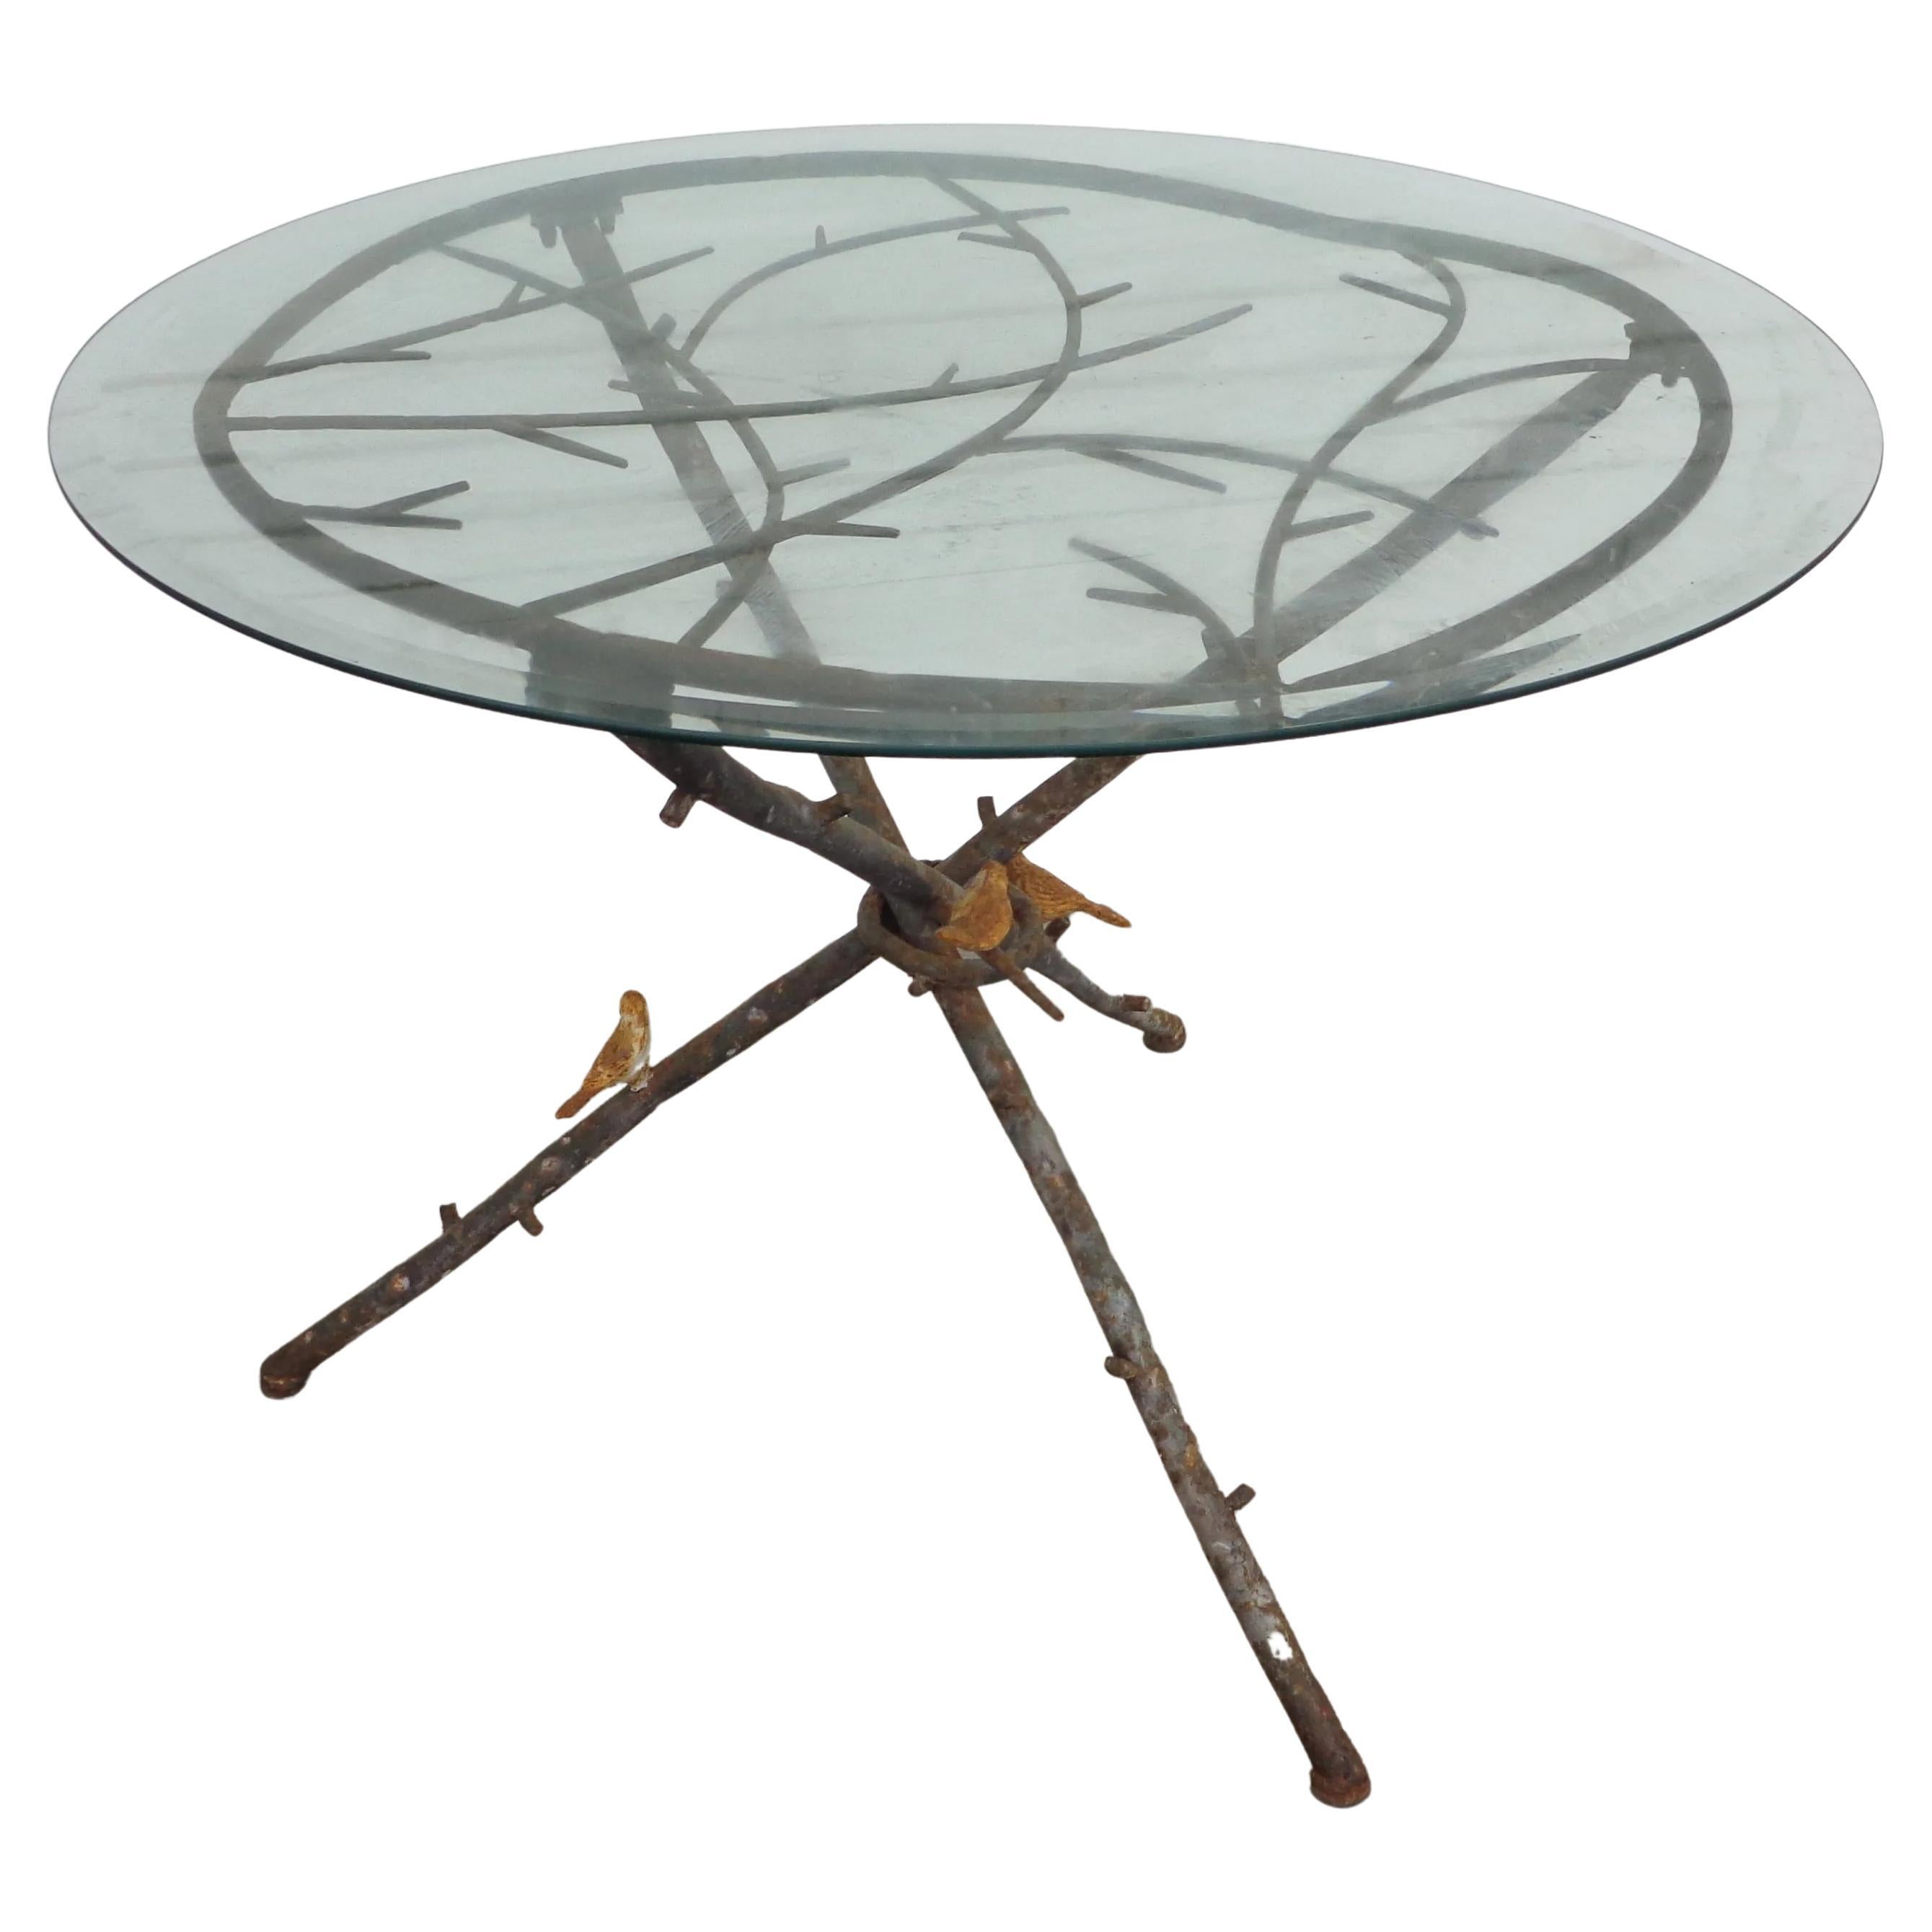 36? Vintage Figurative Giacometti Style Metal Faux Bois and Glass Dining Garden Patio Table

Charming faux bois base with tiny bird insets. Hand forged metal.

Measures: 36? width x 36? depth x 28.75? height

Can be shipped without glass for